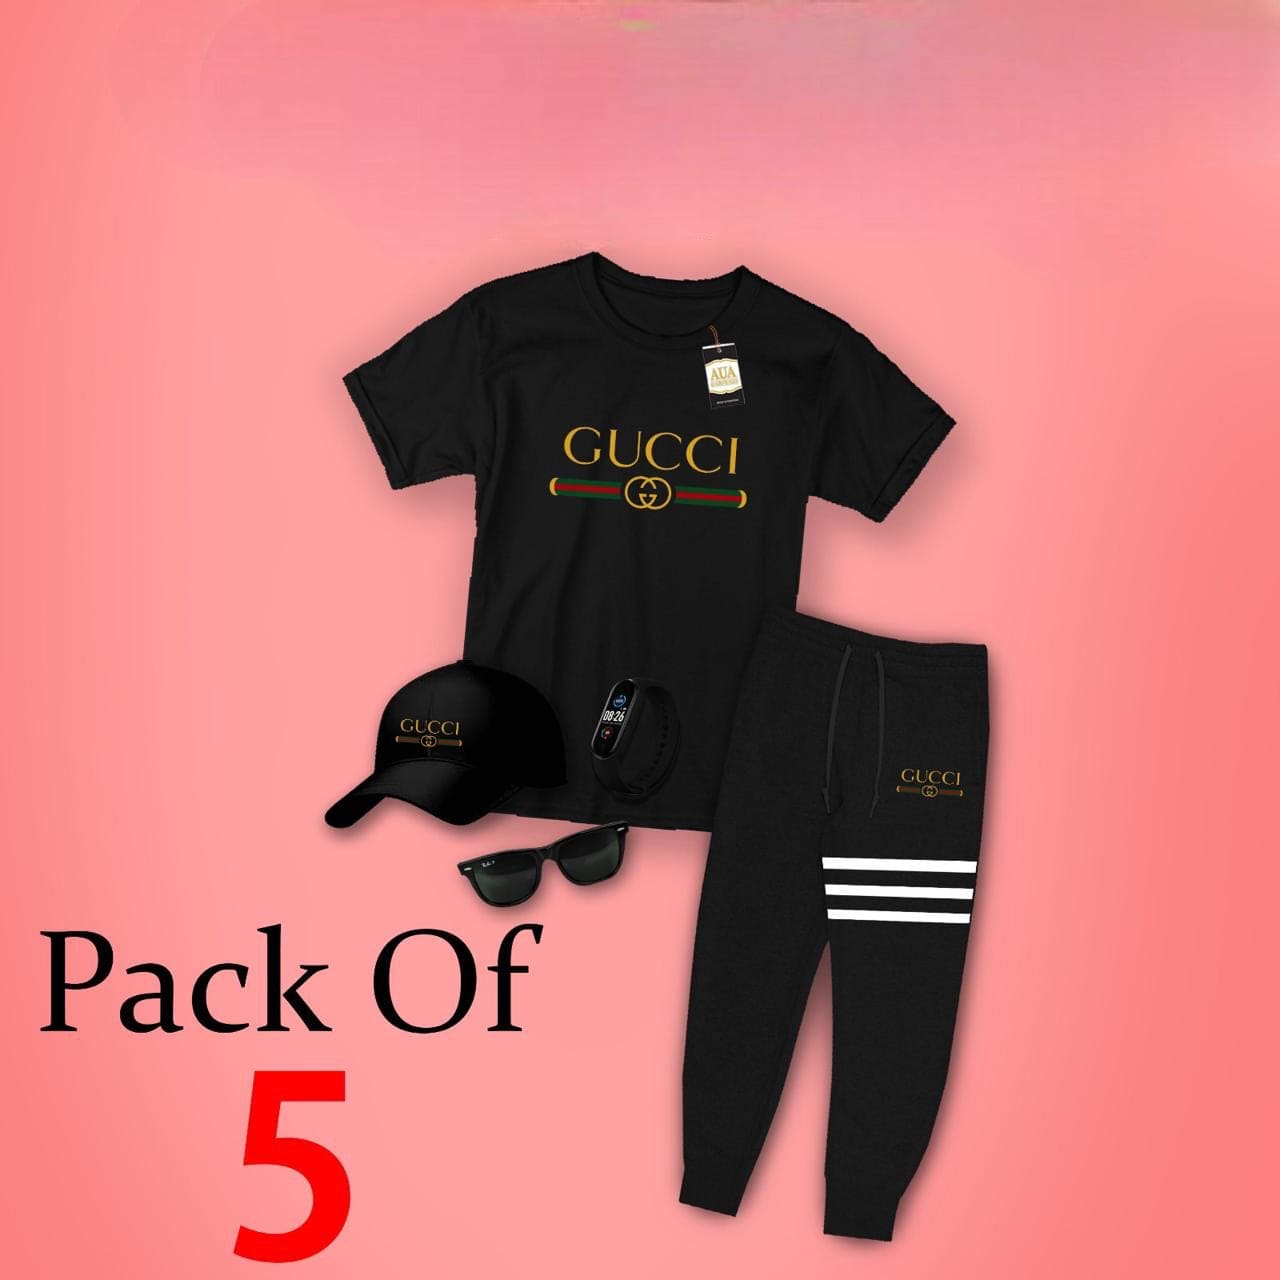 Pack Of 5 Gucci Print Kids Track Suit, Kids Track Suit With Accessories, Kids Printed Clothes